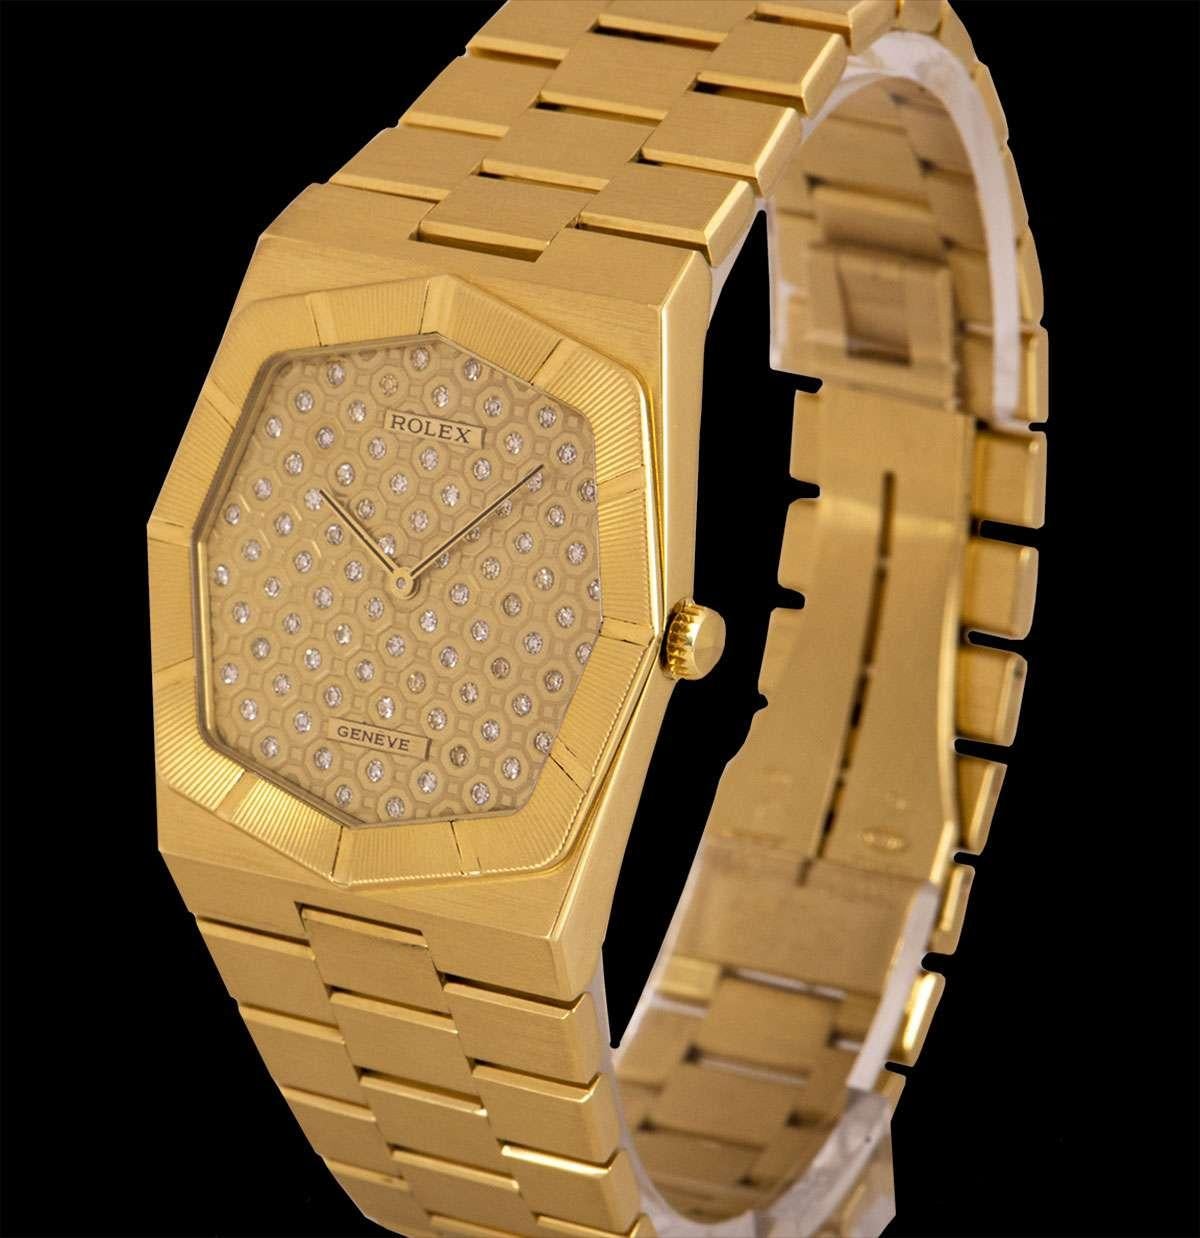 A 32 mm 18k Yellow Gold Cellini Vintage Gents Wristwatch, rare champagne pleiade diamond dial, a fixed 18k yellow gold engine turned bezel, an 18k yellow gold bracelet with a concealed 18k yellow gold deployant clasp, sapphire glass, manual wind